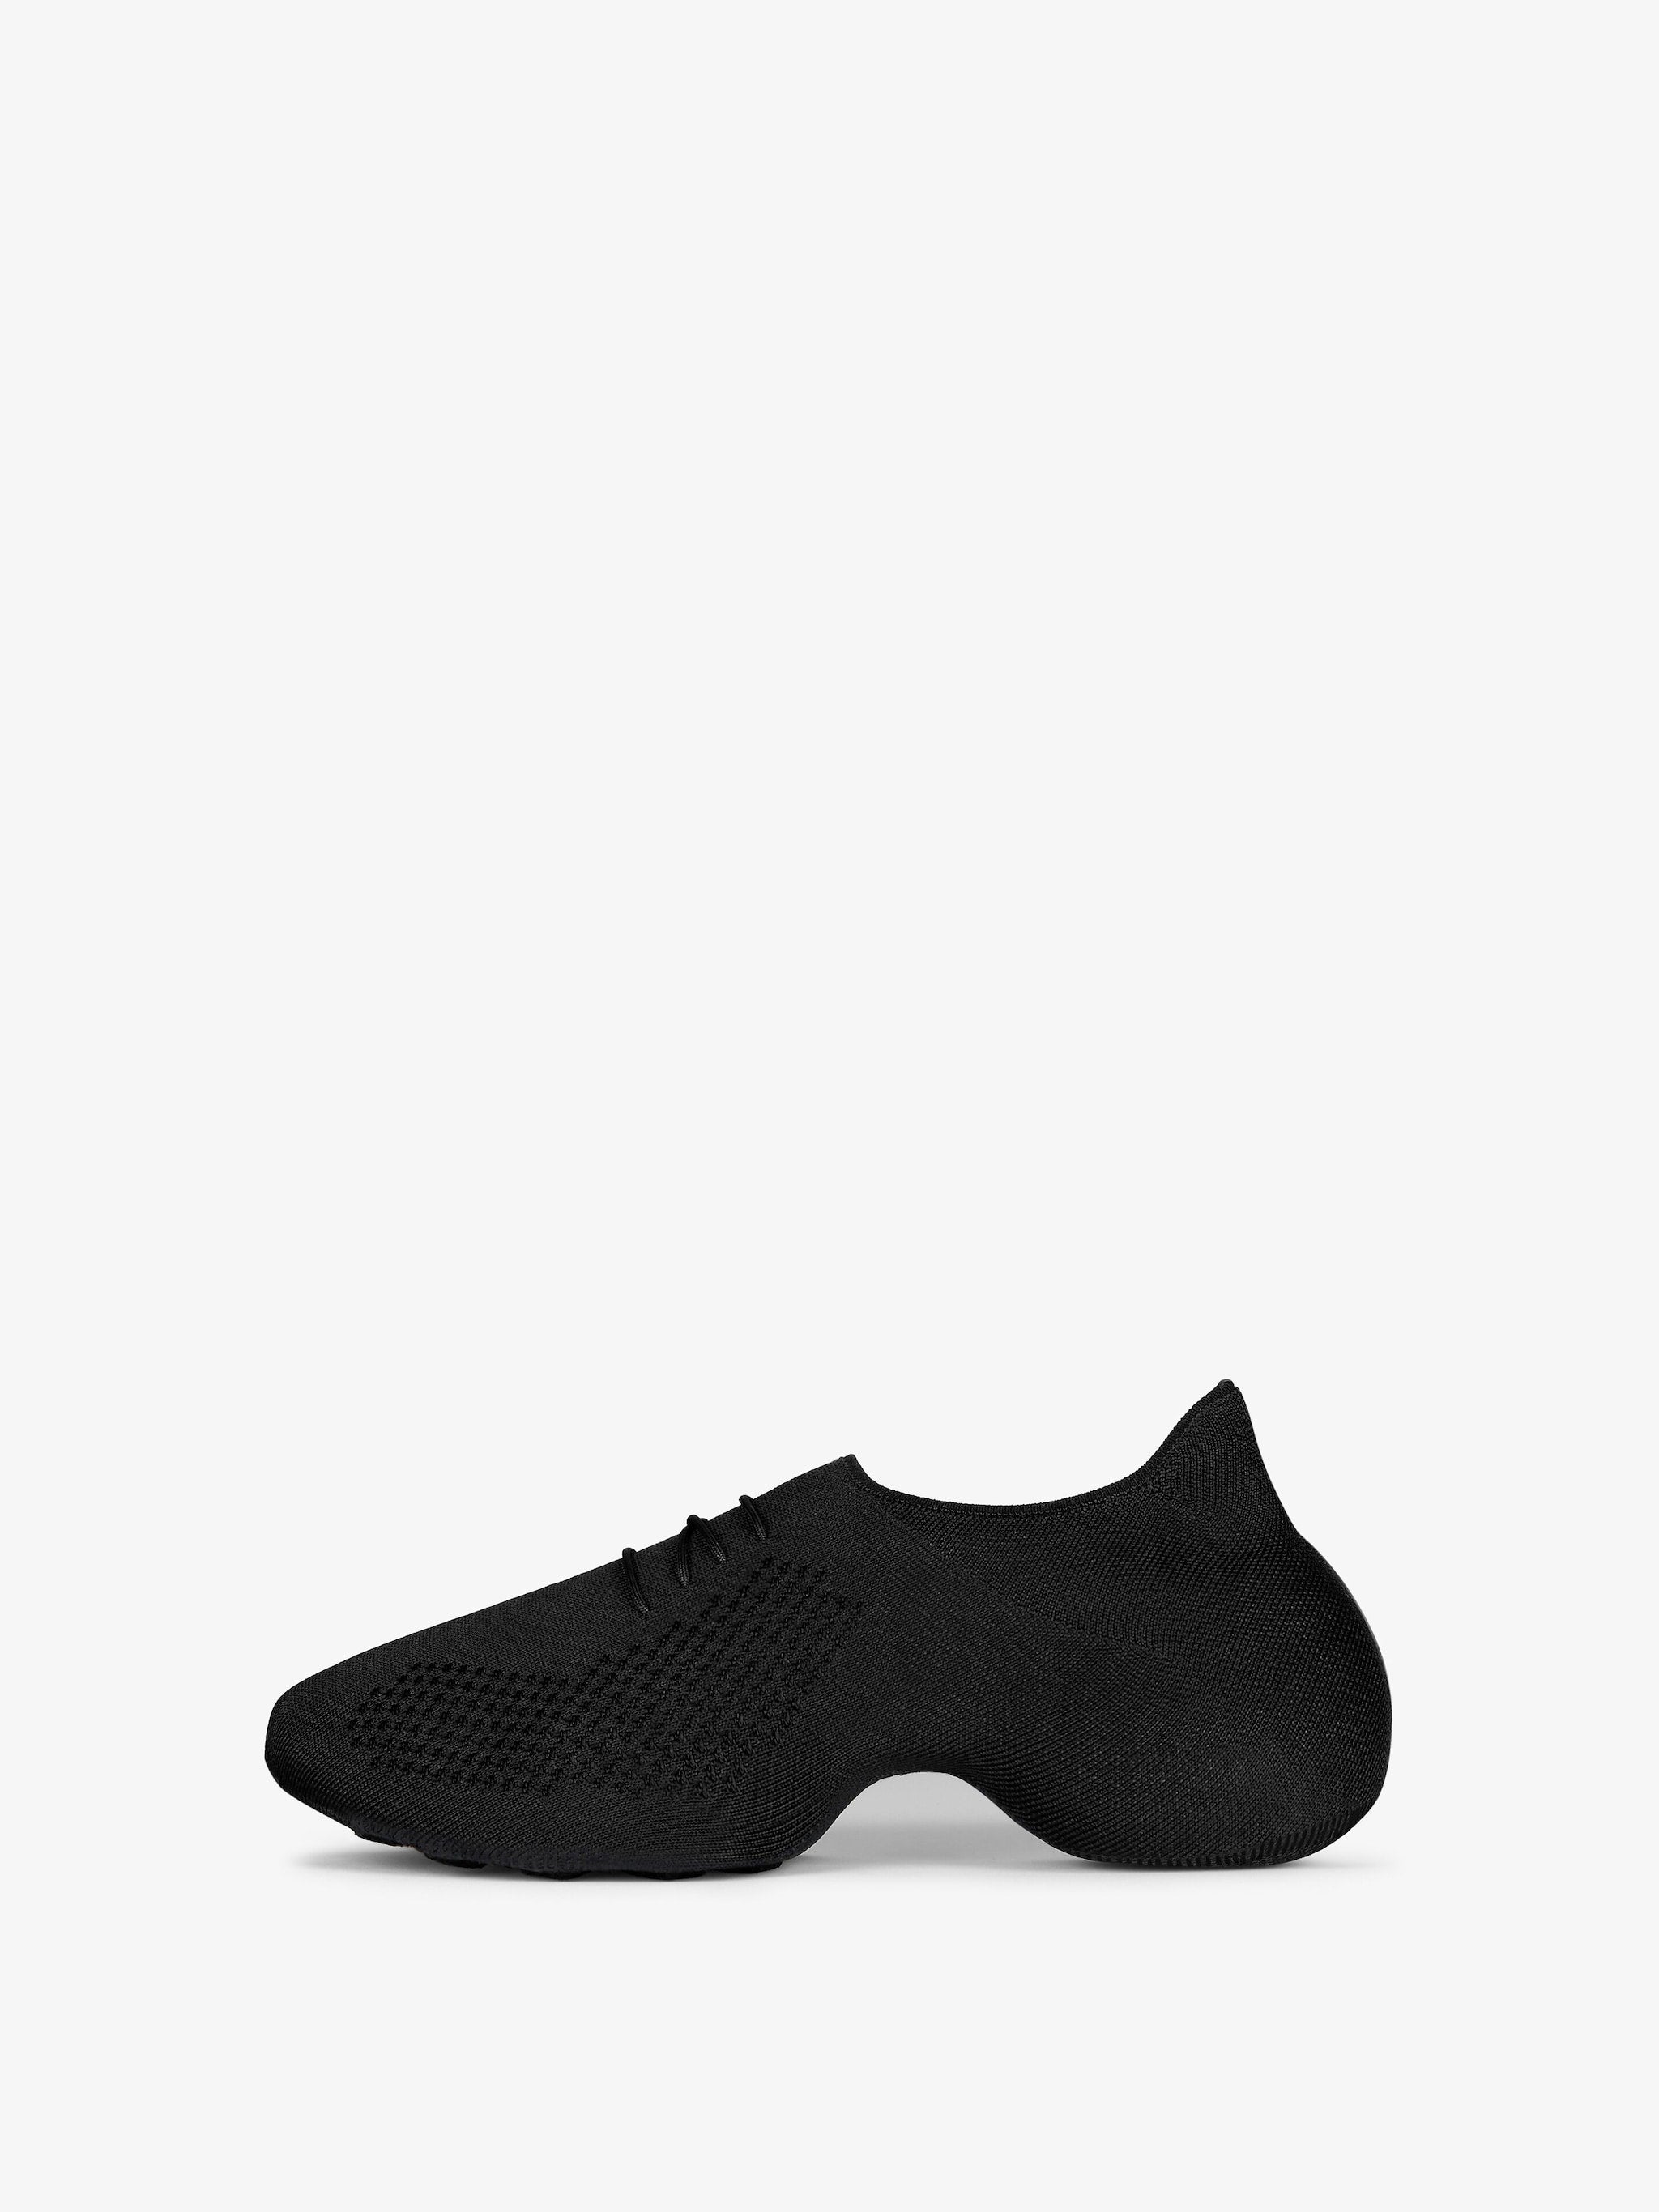 Givenchy TK-360 Sneakers In Knit Black